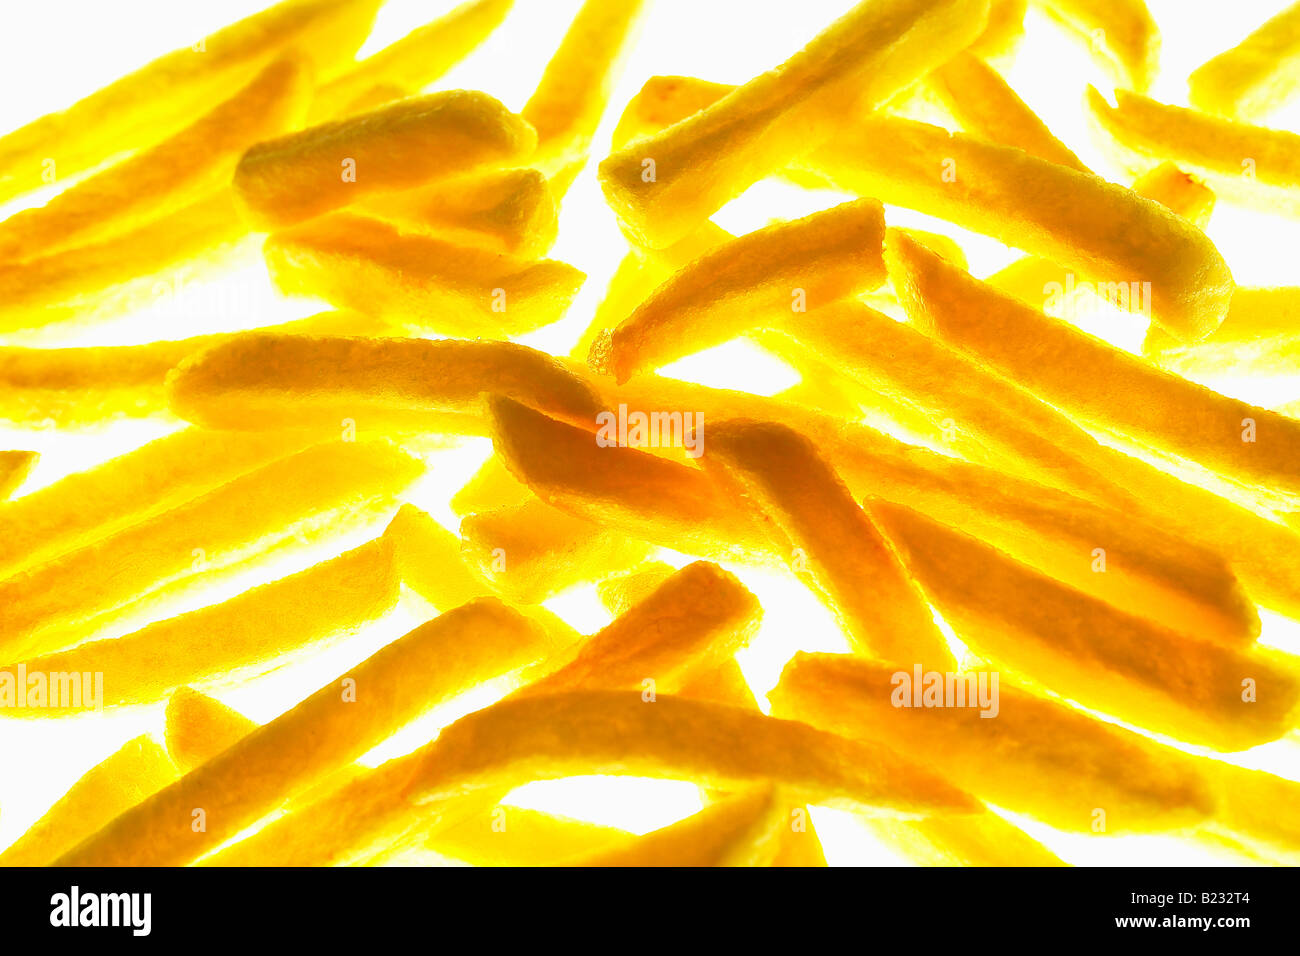 Close-up of french fries Close-up of french fries Stock Photo